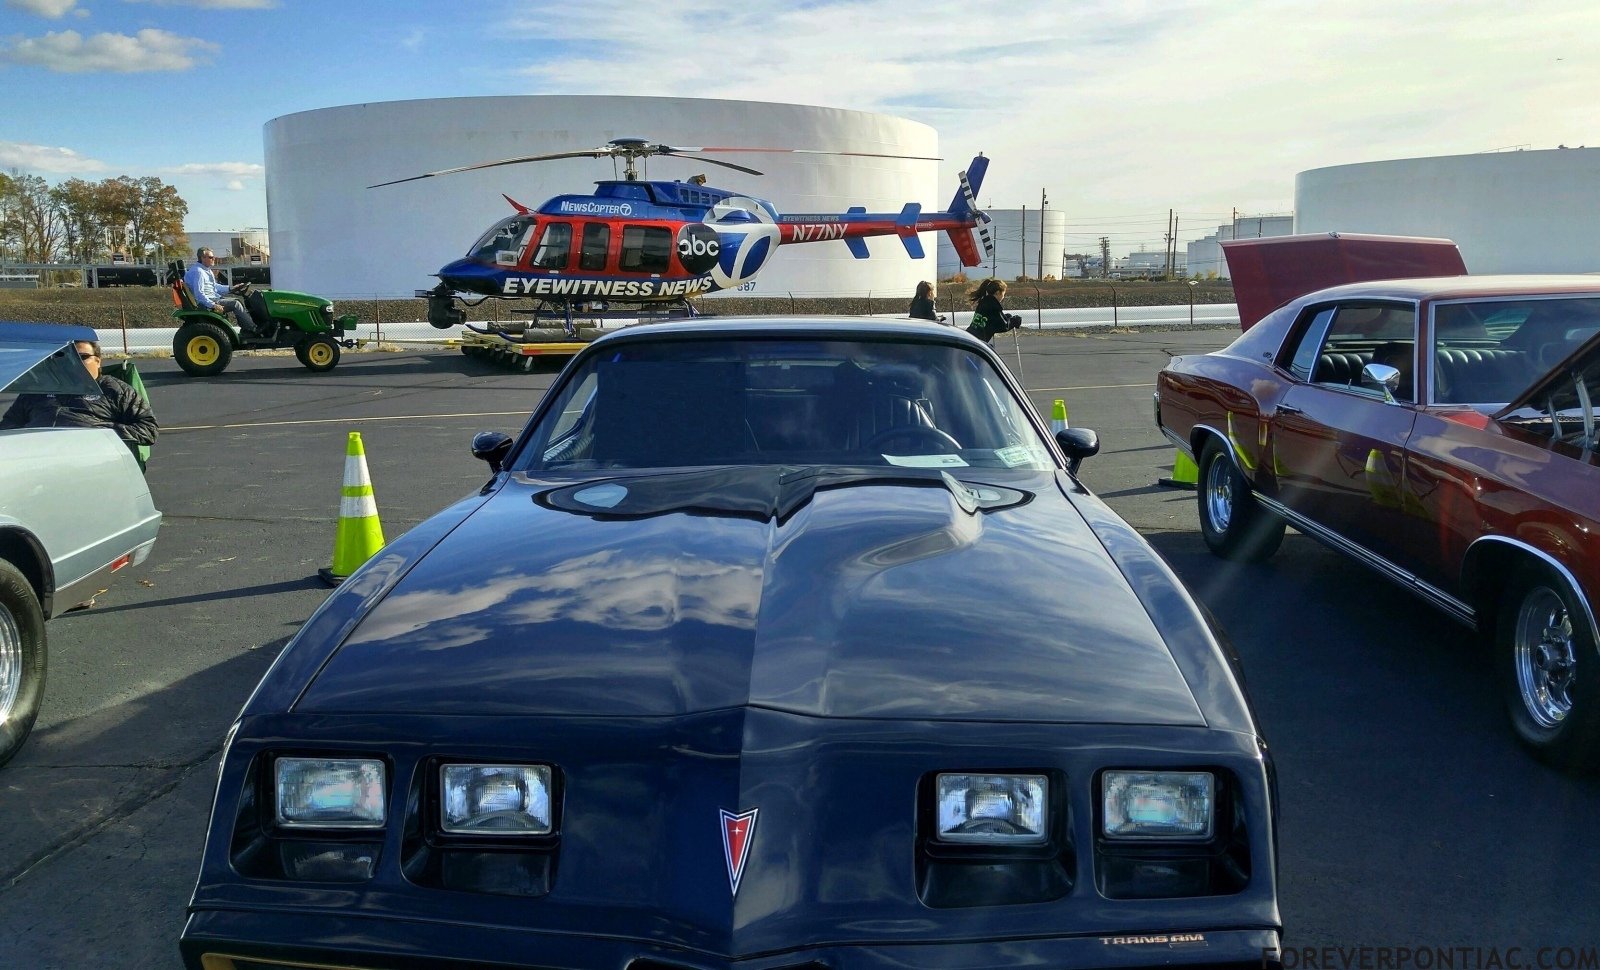 Linden NJ Airport Car Show, with news Helicopter being towed